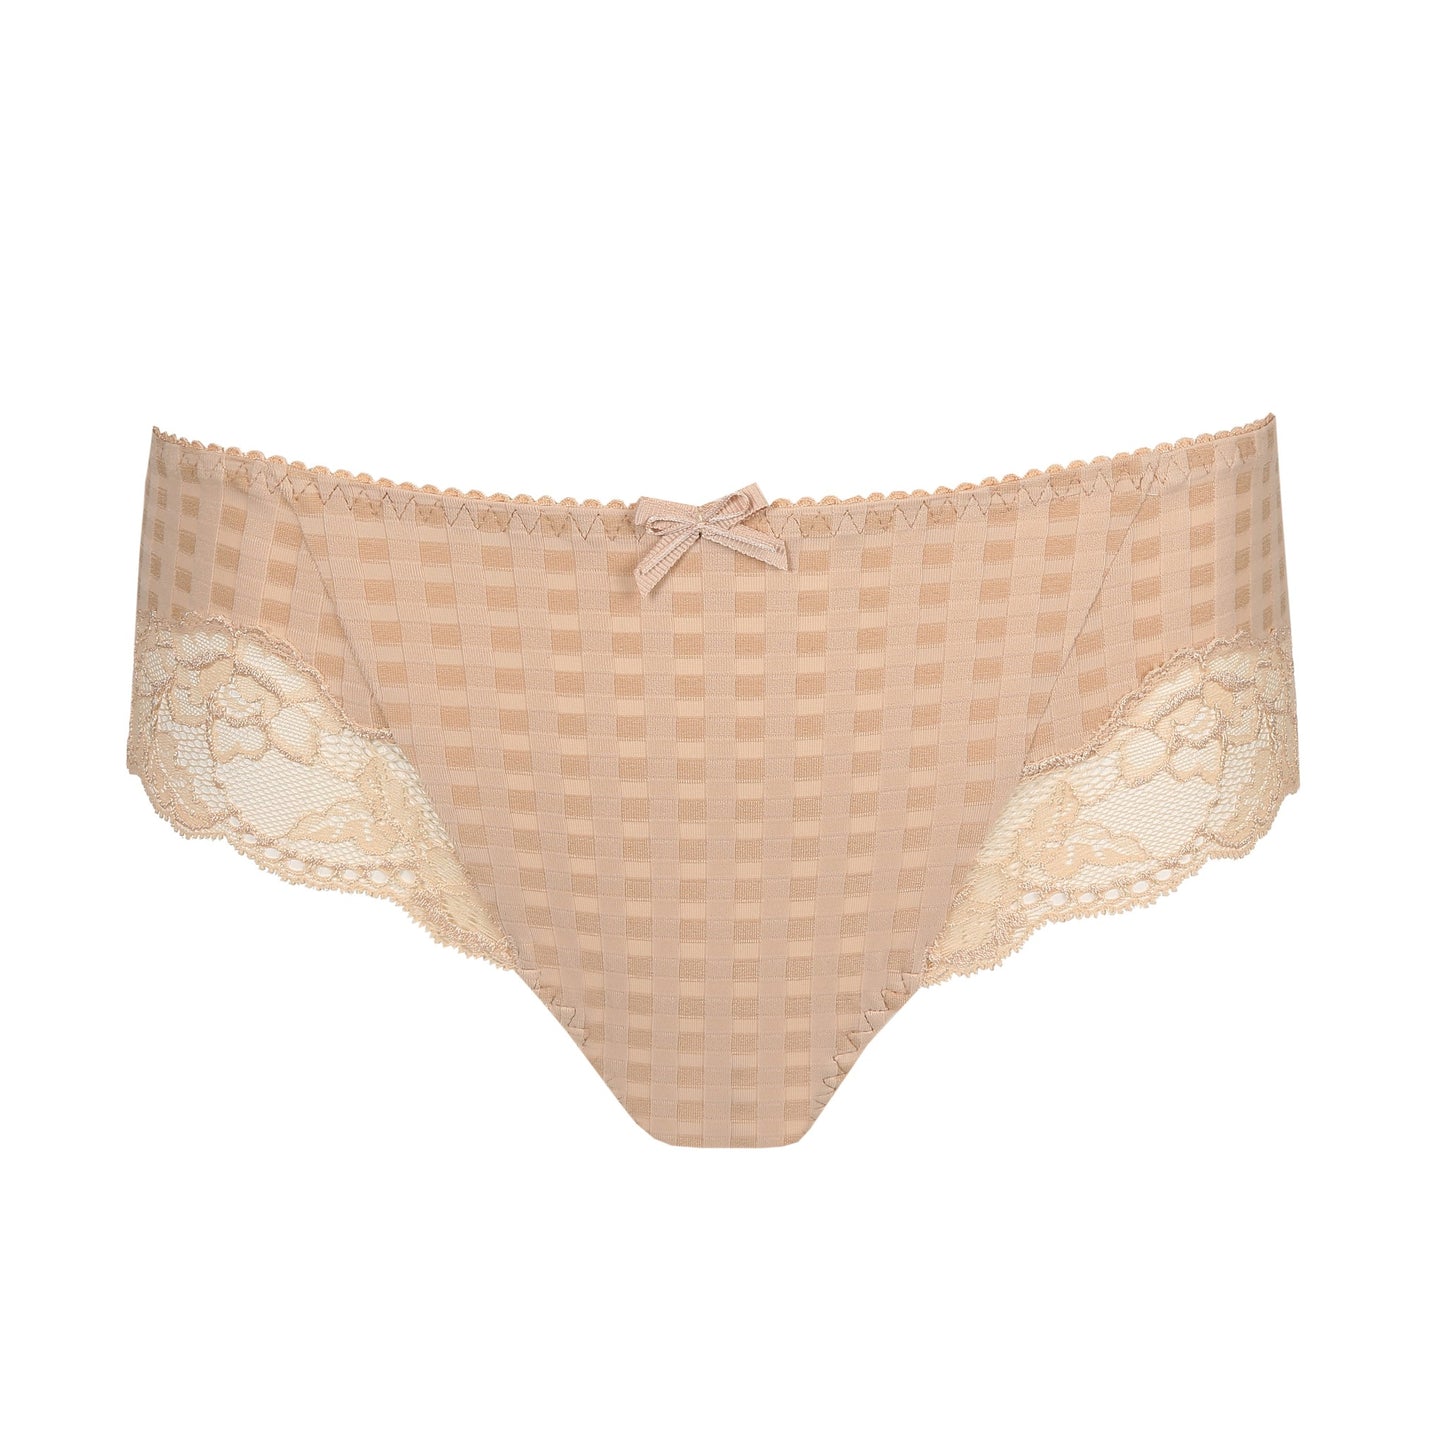 Front view of the Madison cheeky cut panty with lace inserts in Caffe Latte by Primadonna.